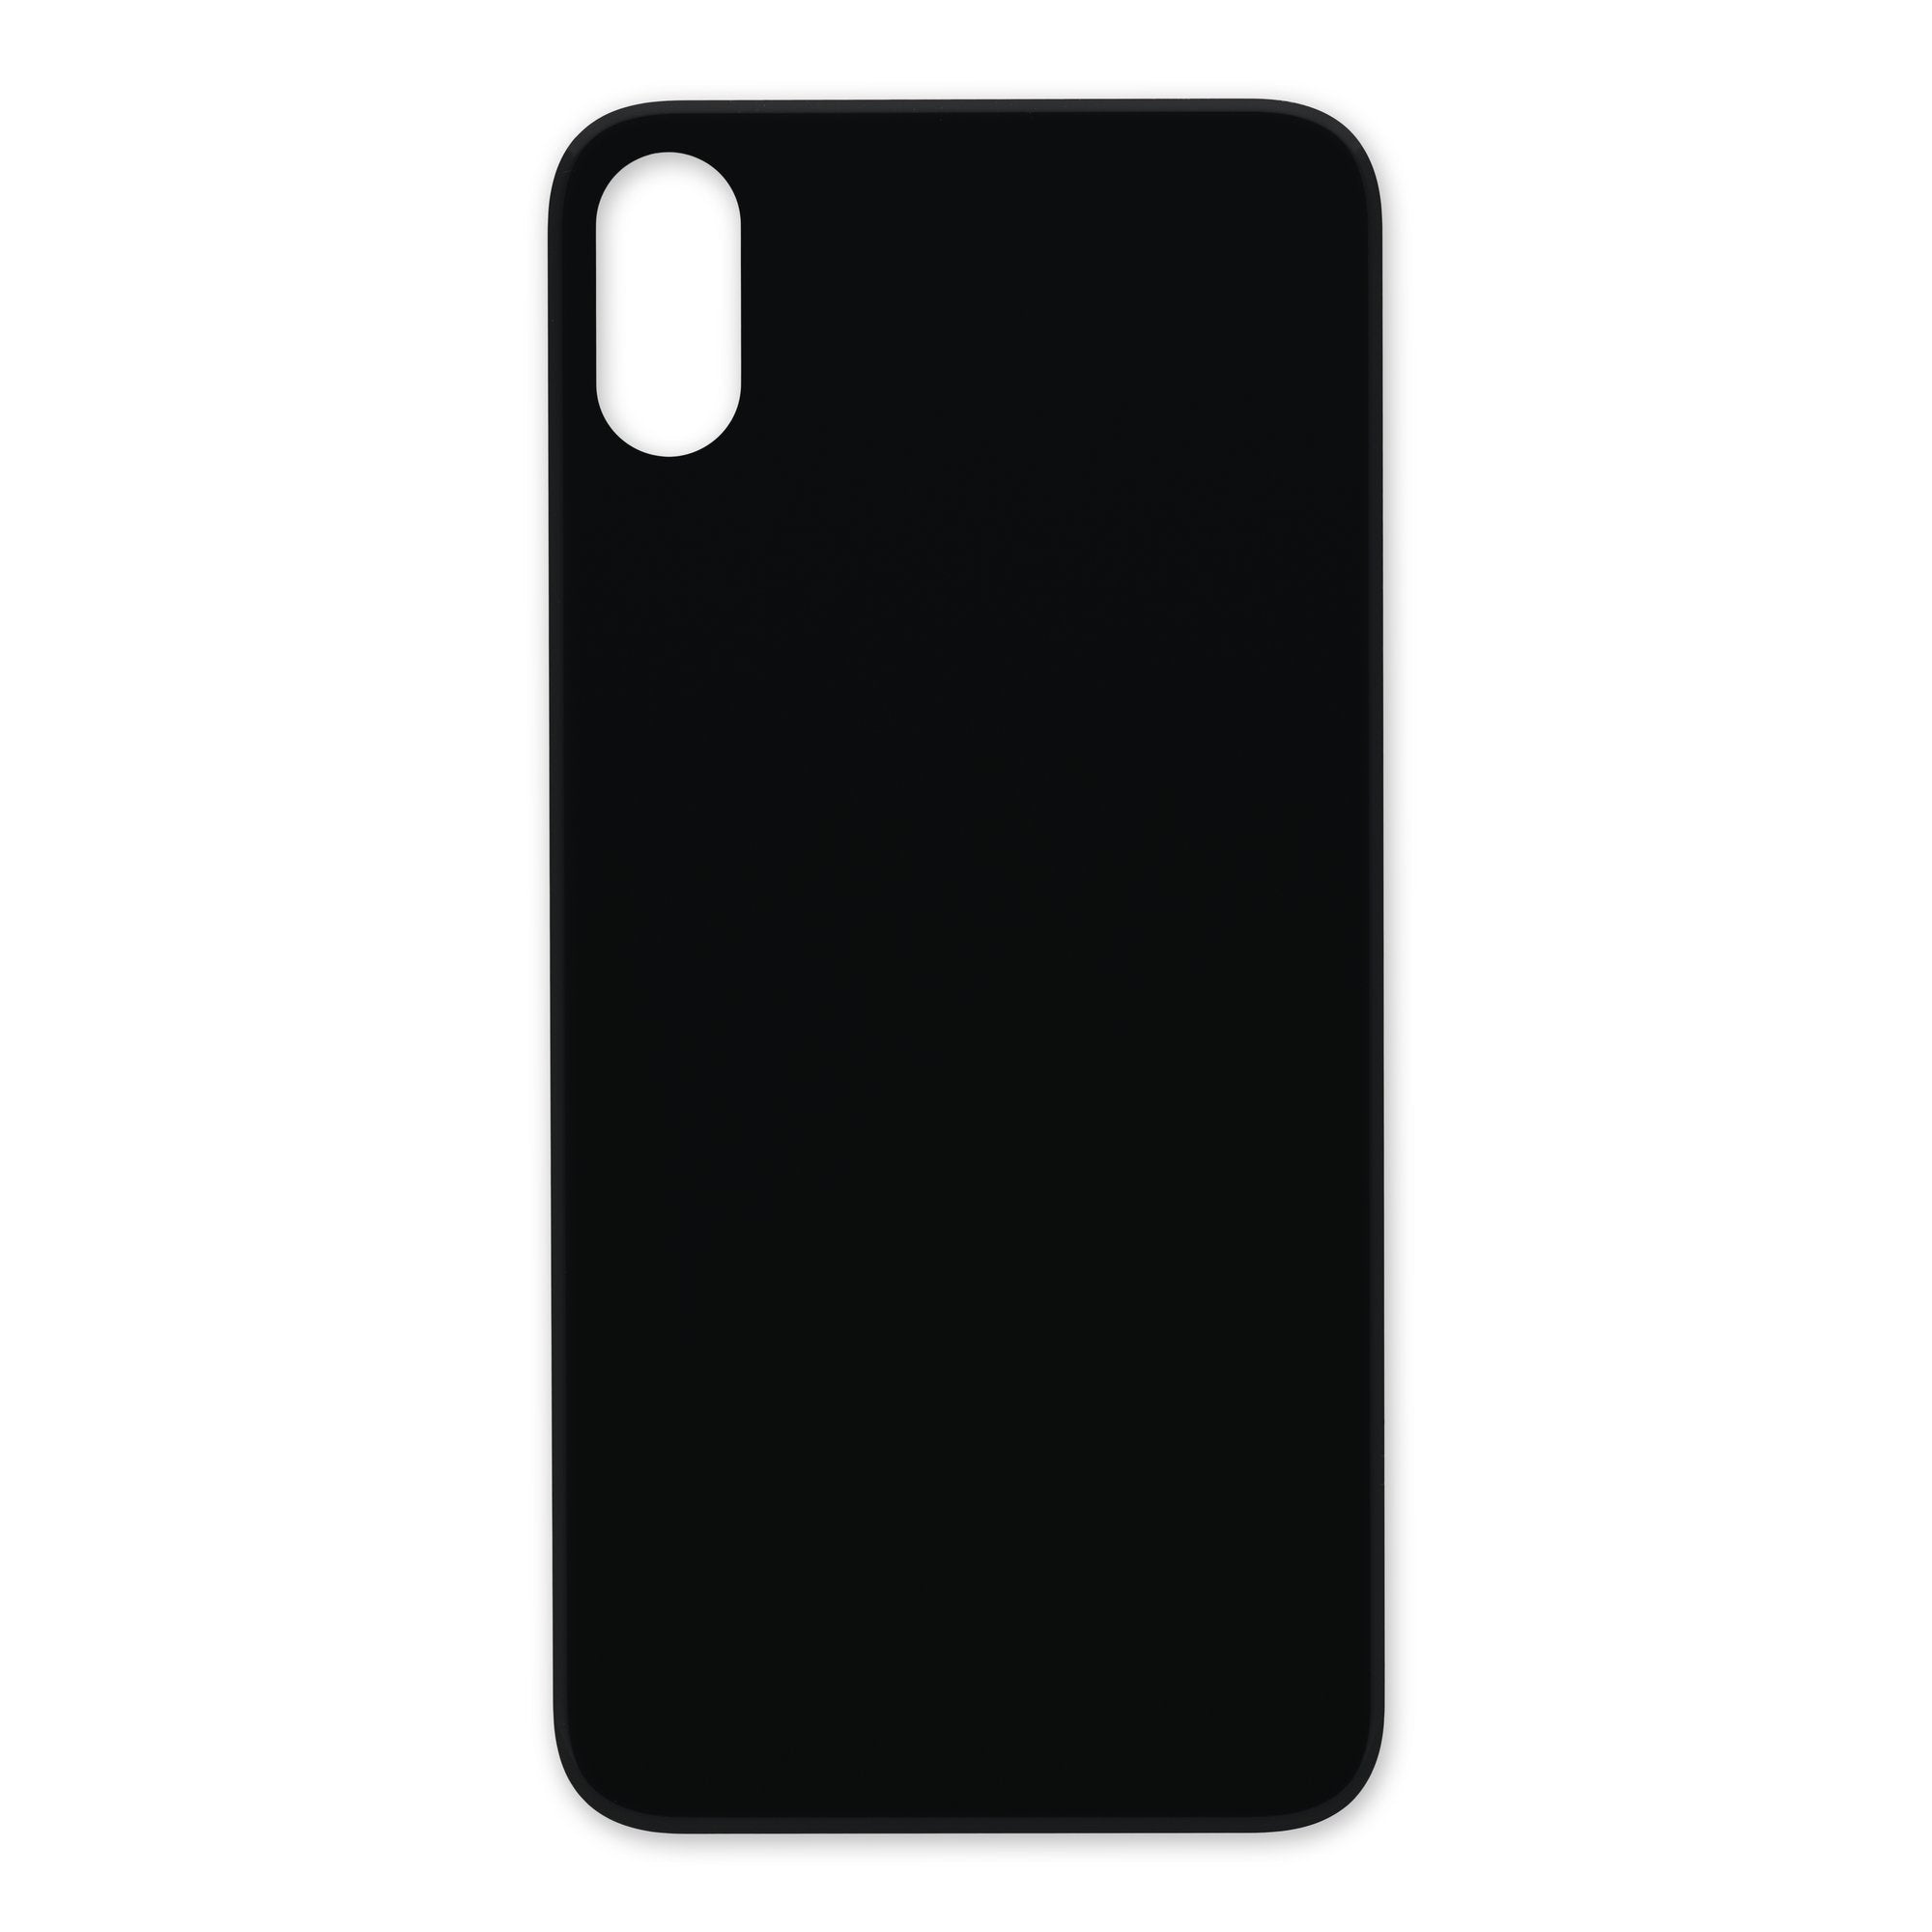 iPhone X Aftermarket Blank Rear Glass Panel Gray New